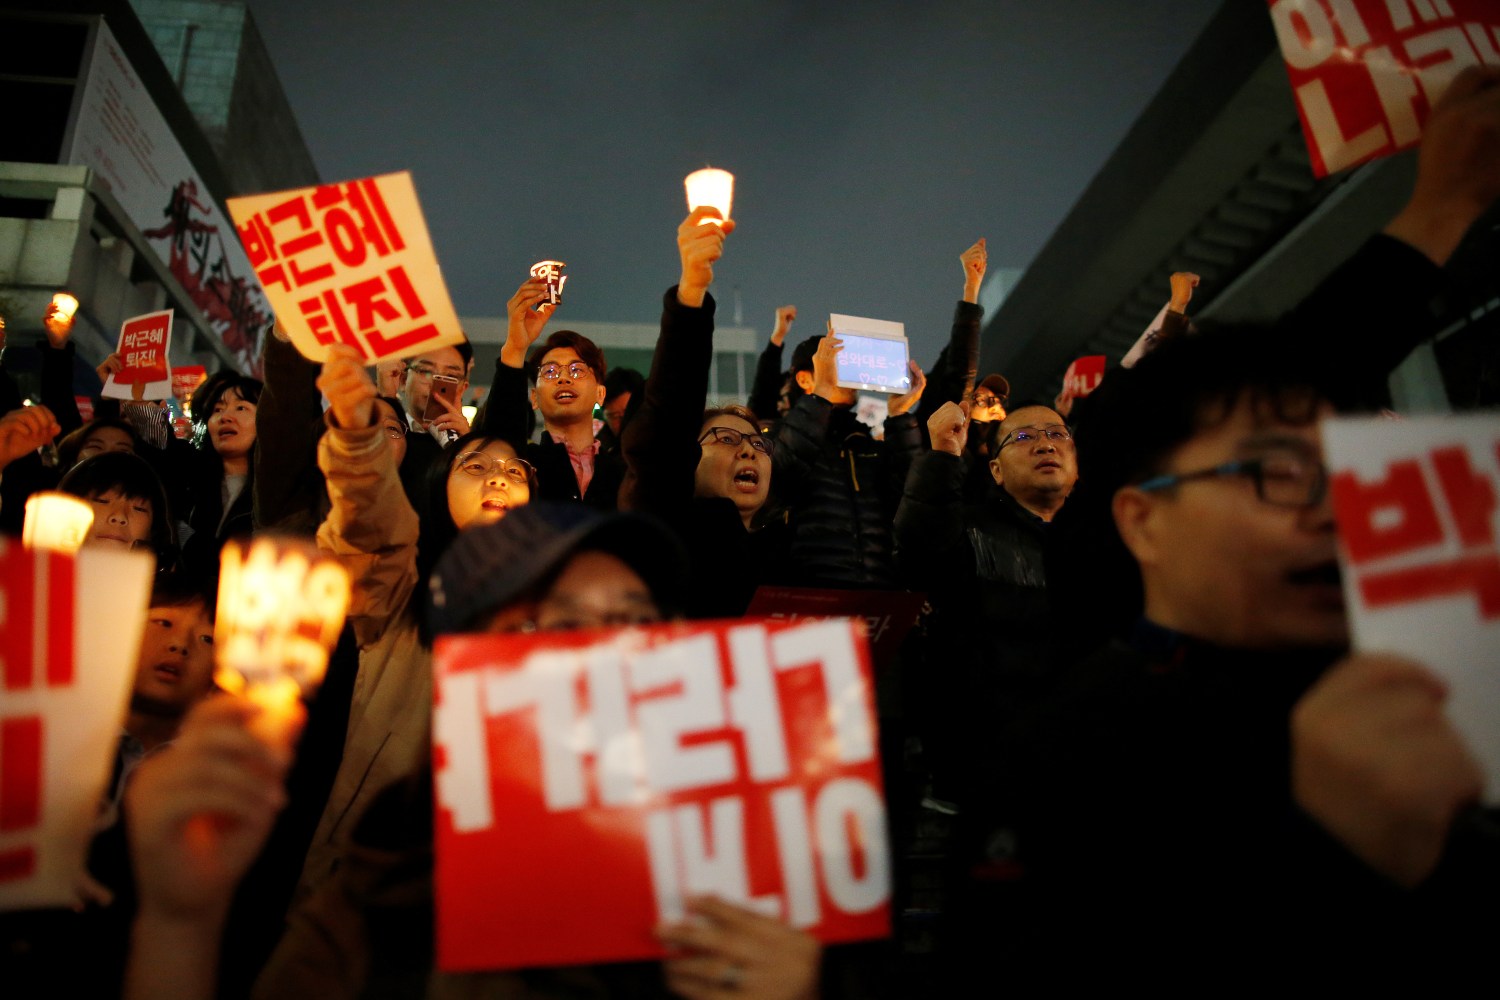 South Korean people chant slogans during a rally calling on embattled President Park Geun-hye to resign over a growing influence-peddling scandal in central Seoul, South Korea, November 5, 2016. The placards read, "Step down Park Geun-hye". REUTERS/Kim Hong-Ji - S1AEULBVVAAA